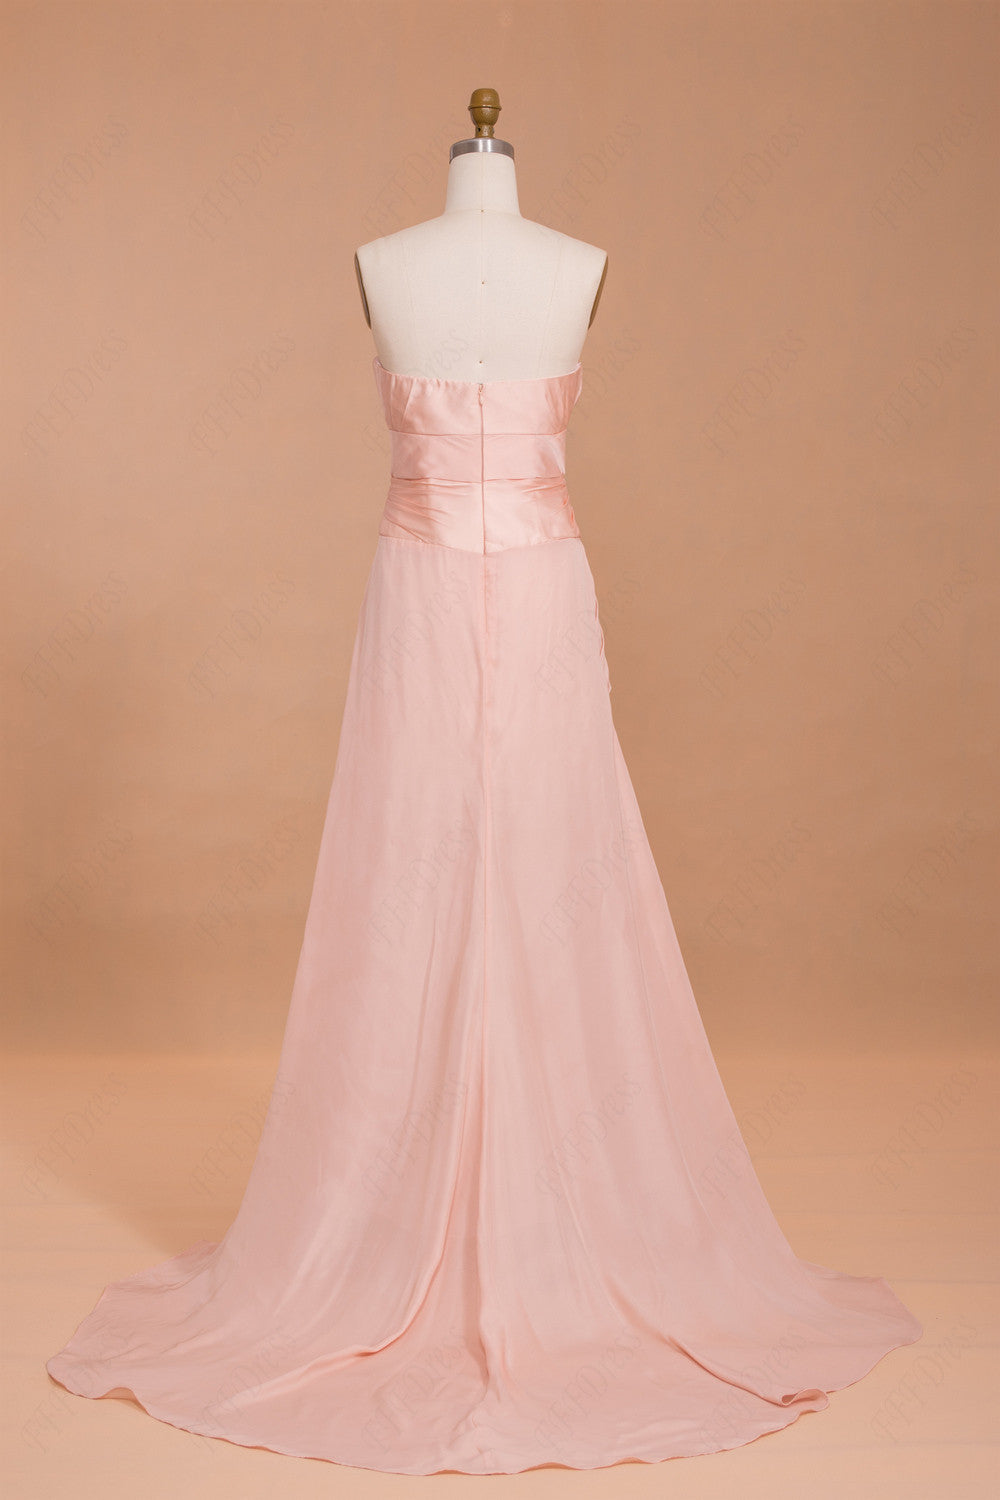 Notched neck peah pink long prom dress